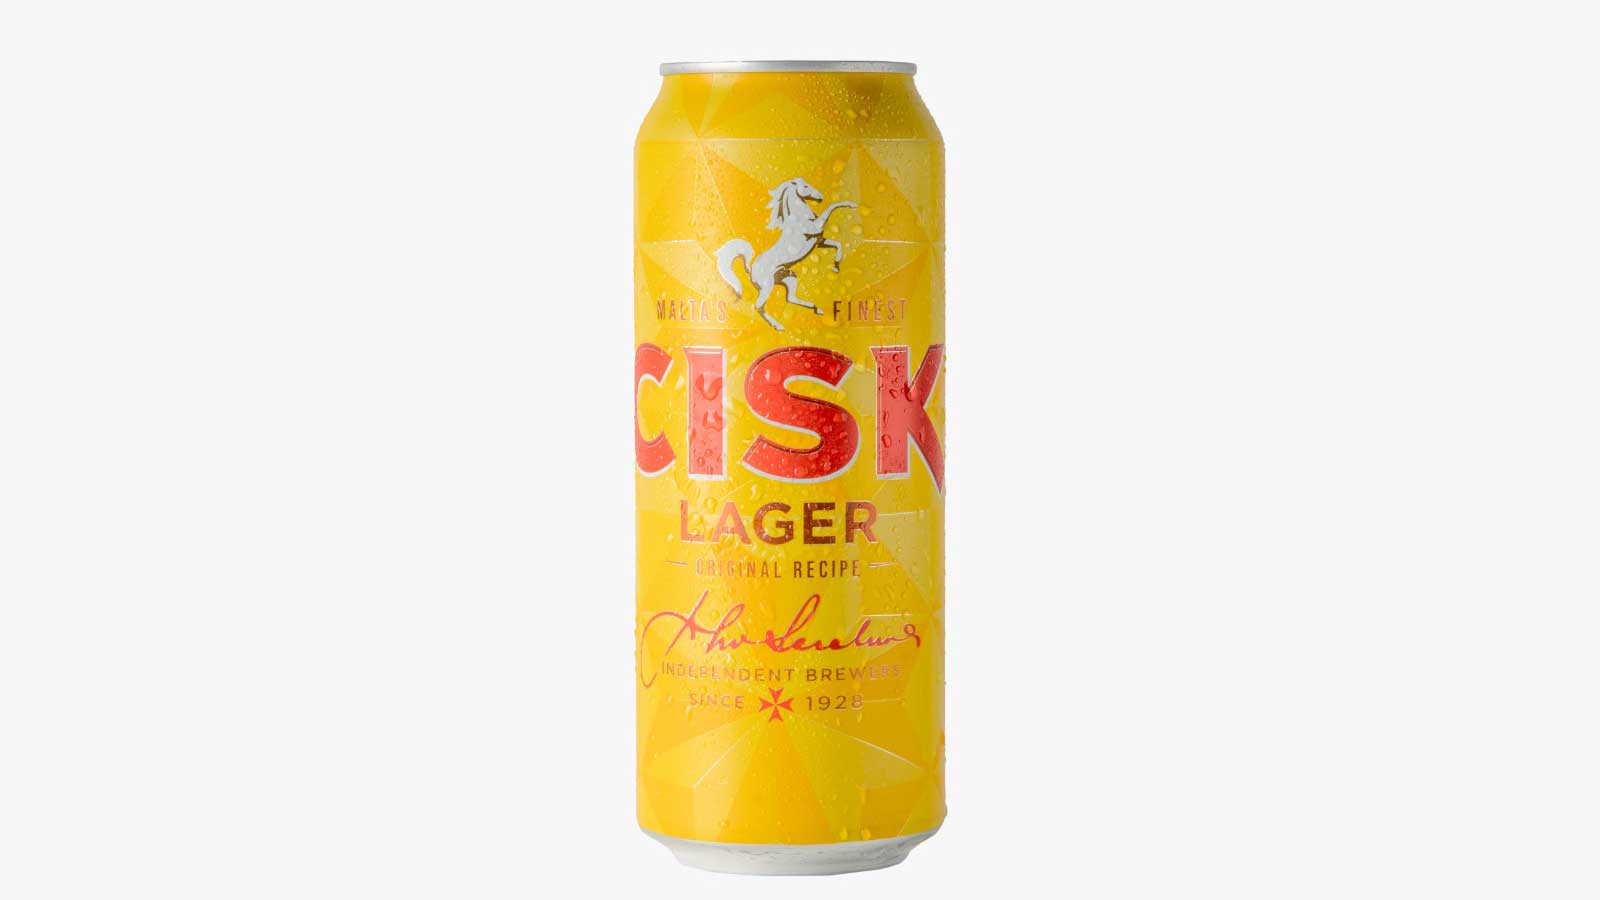 Bold new brand look for Malta’s iconic beer brand Cisk  